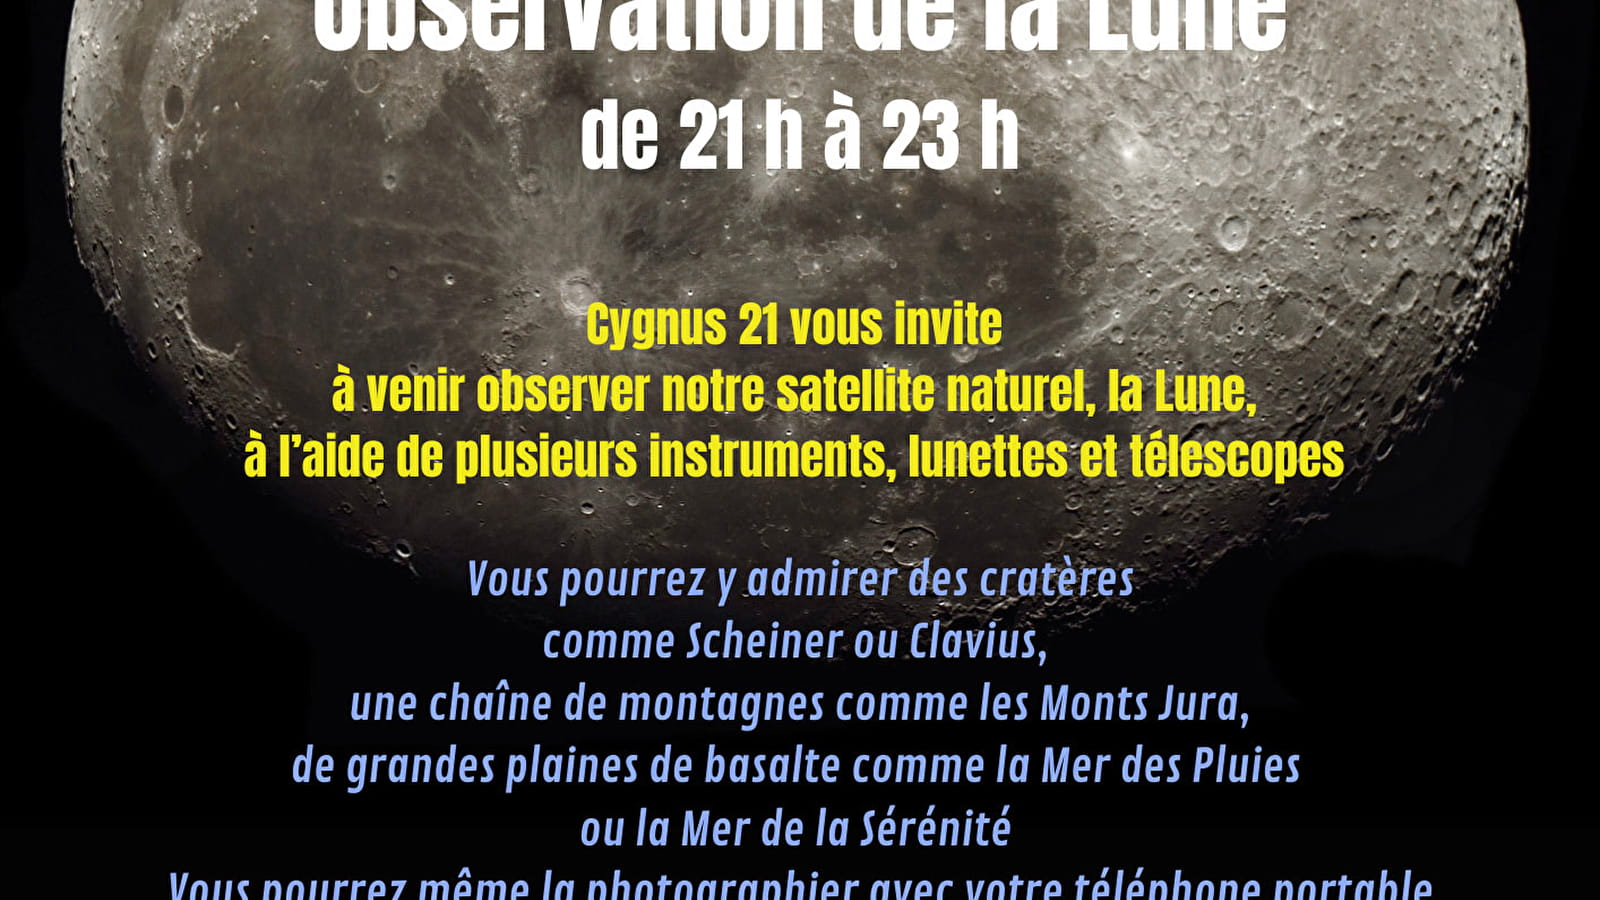 Museum Night: moon observation with the Cygnus 21 association